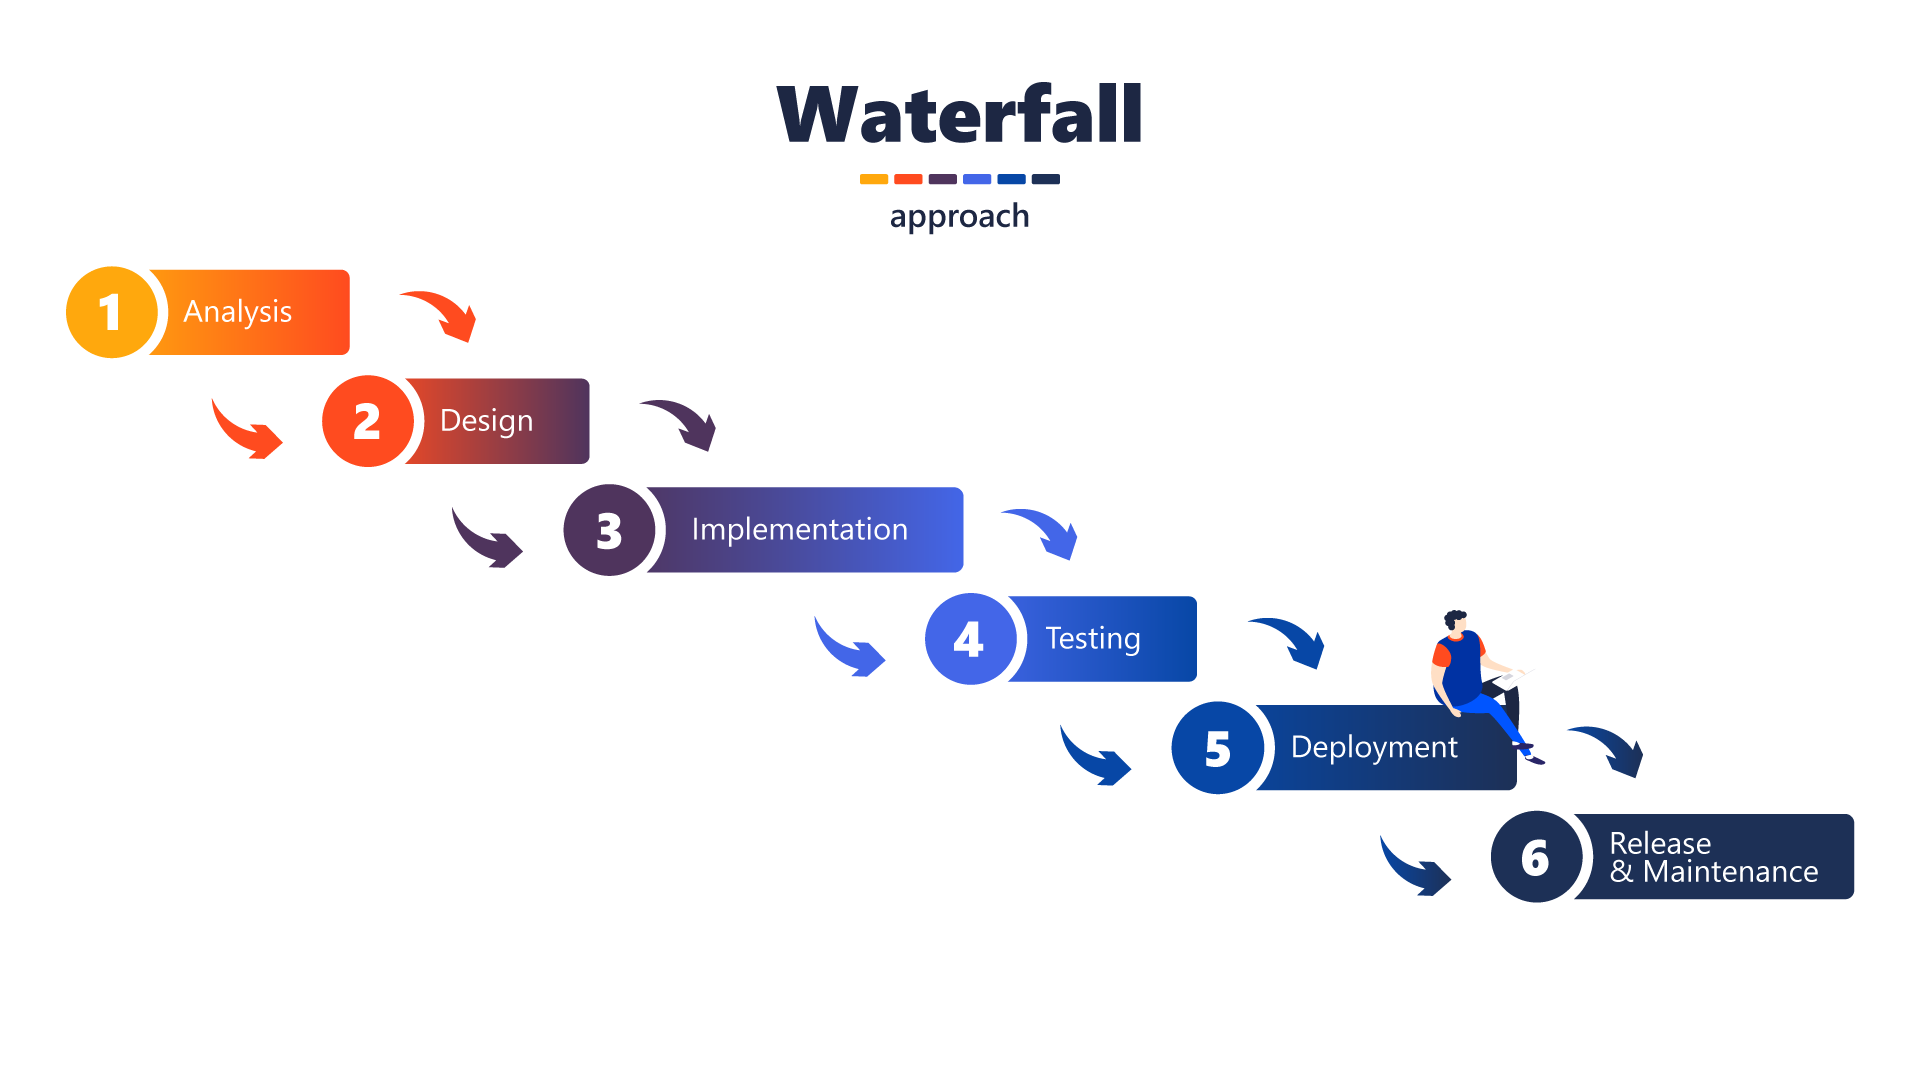 history of waterfall project management